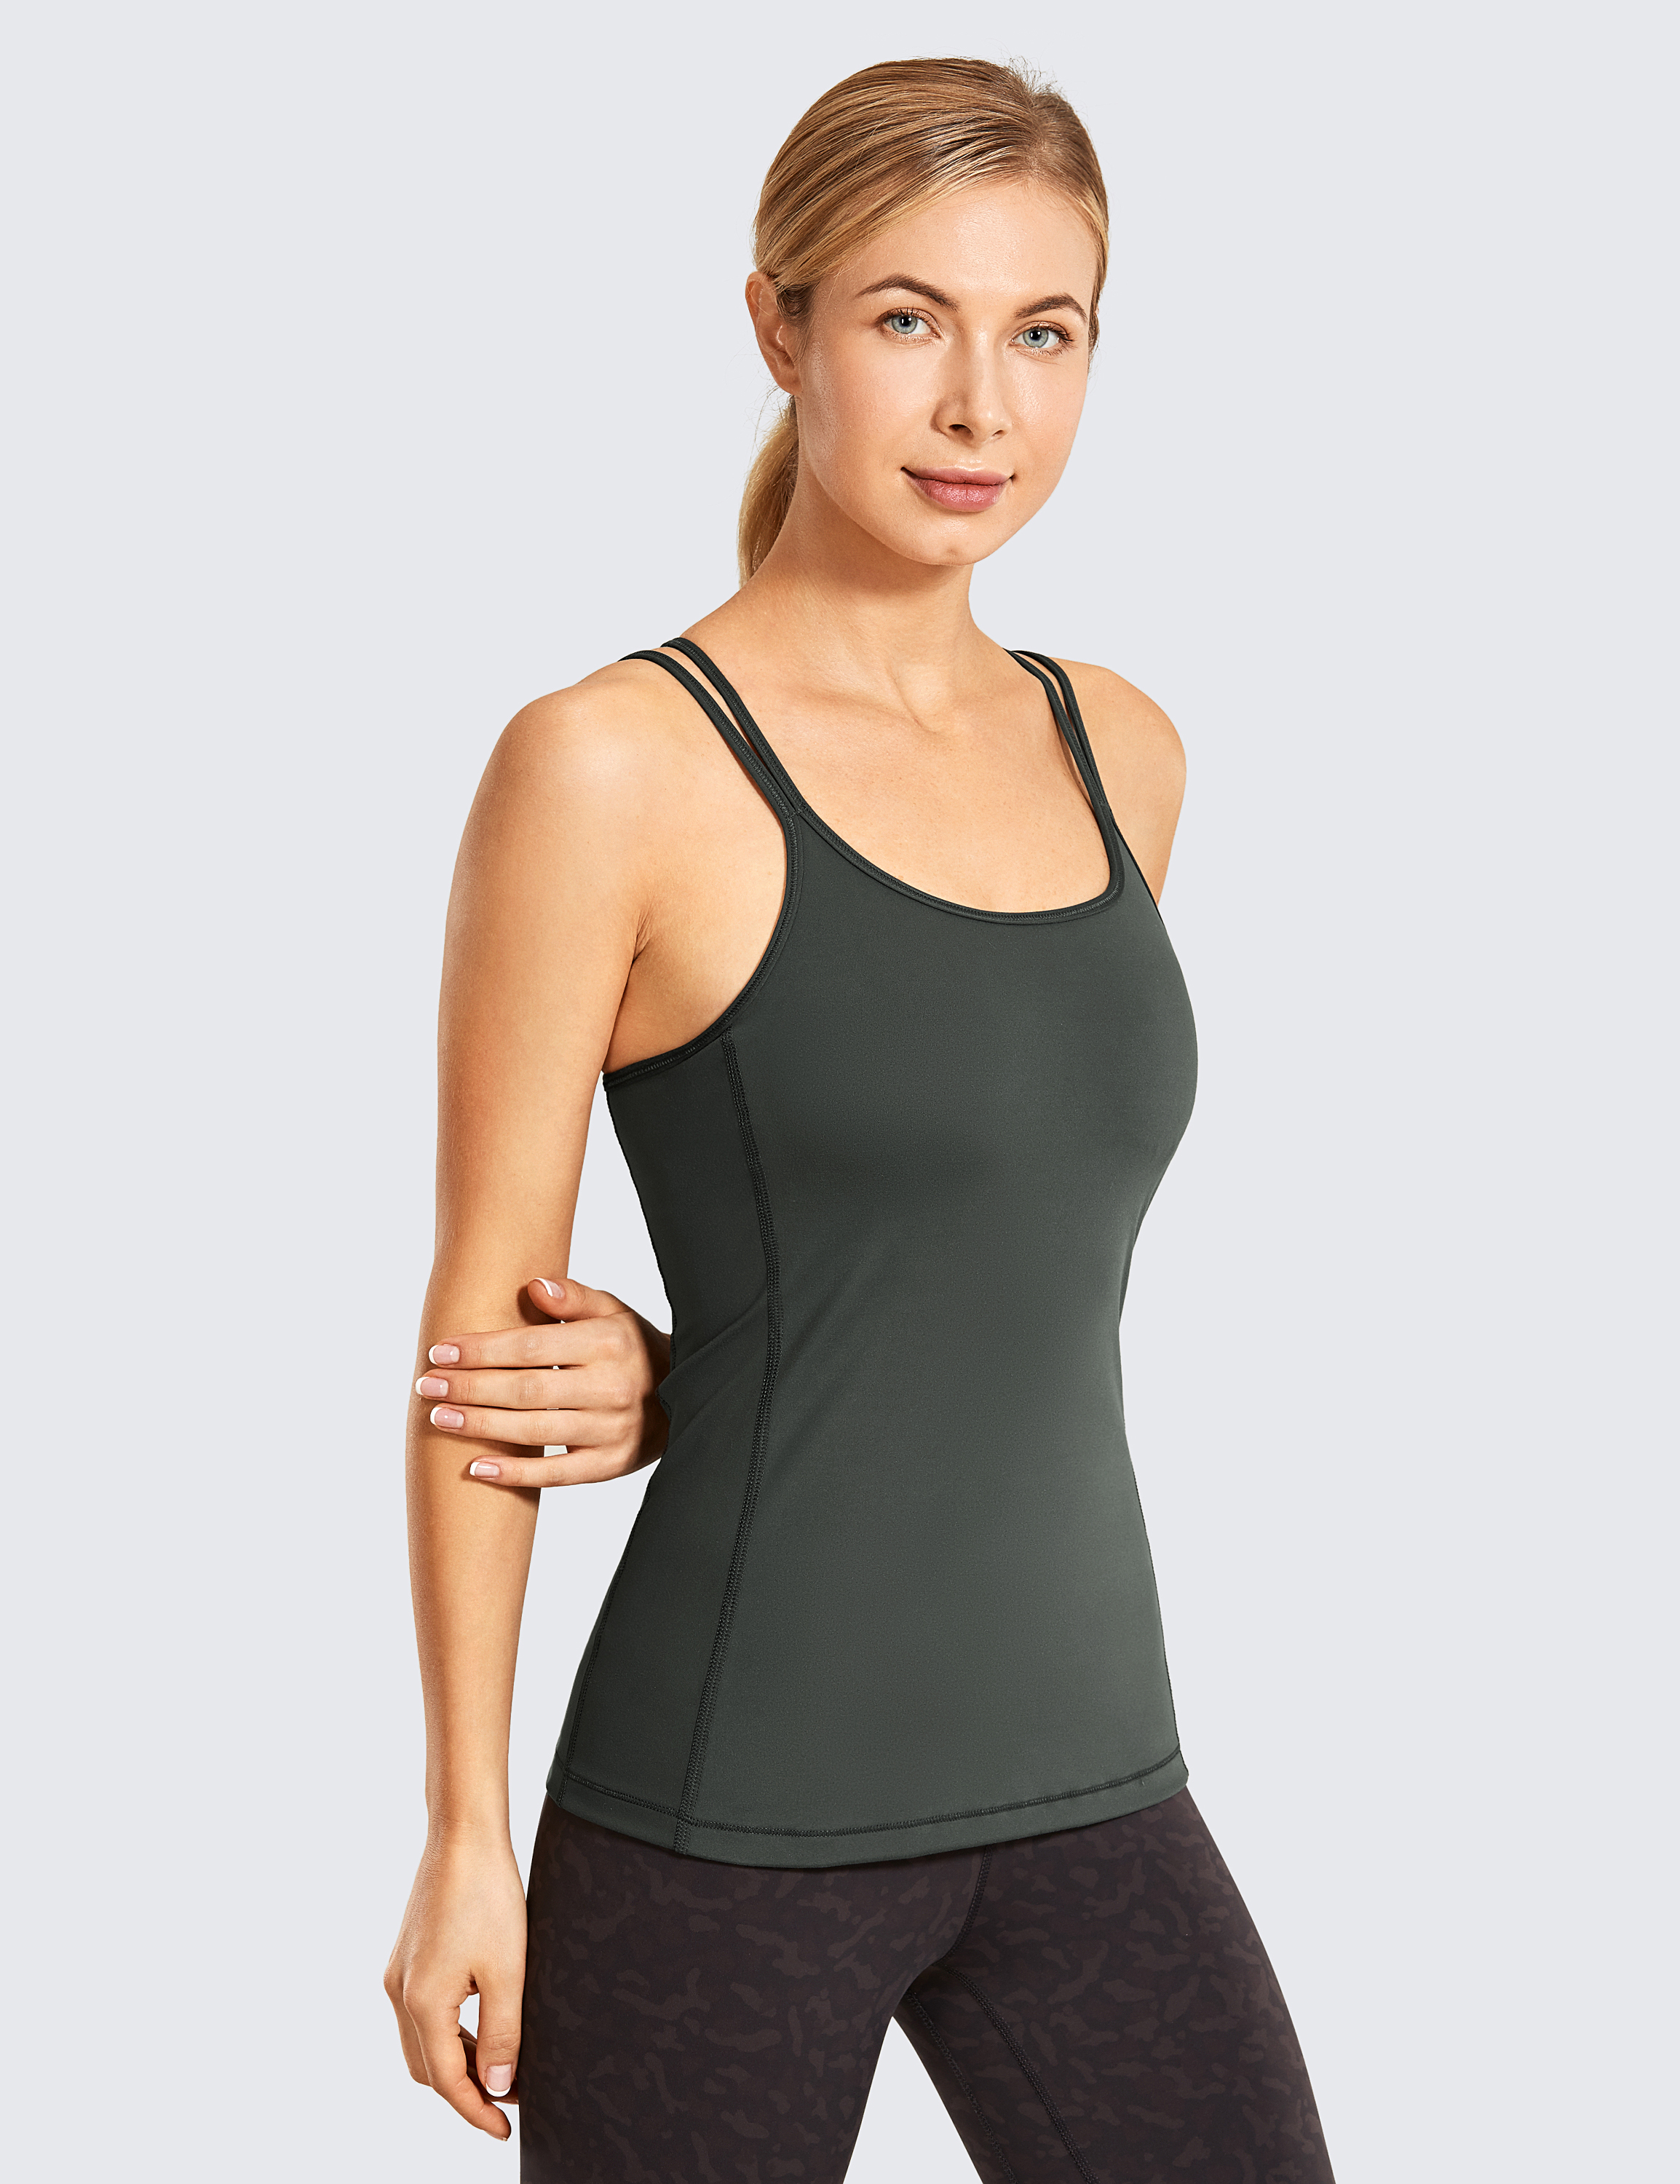 Yoga Tops With Built In Bra Canada Covid